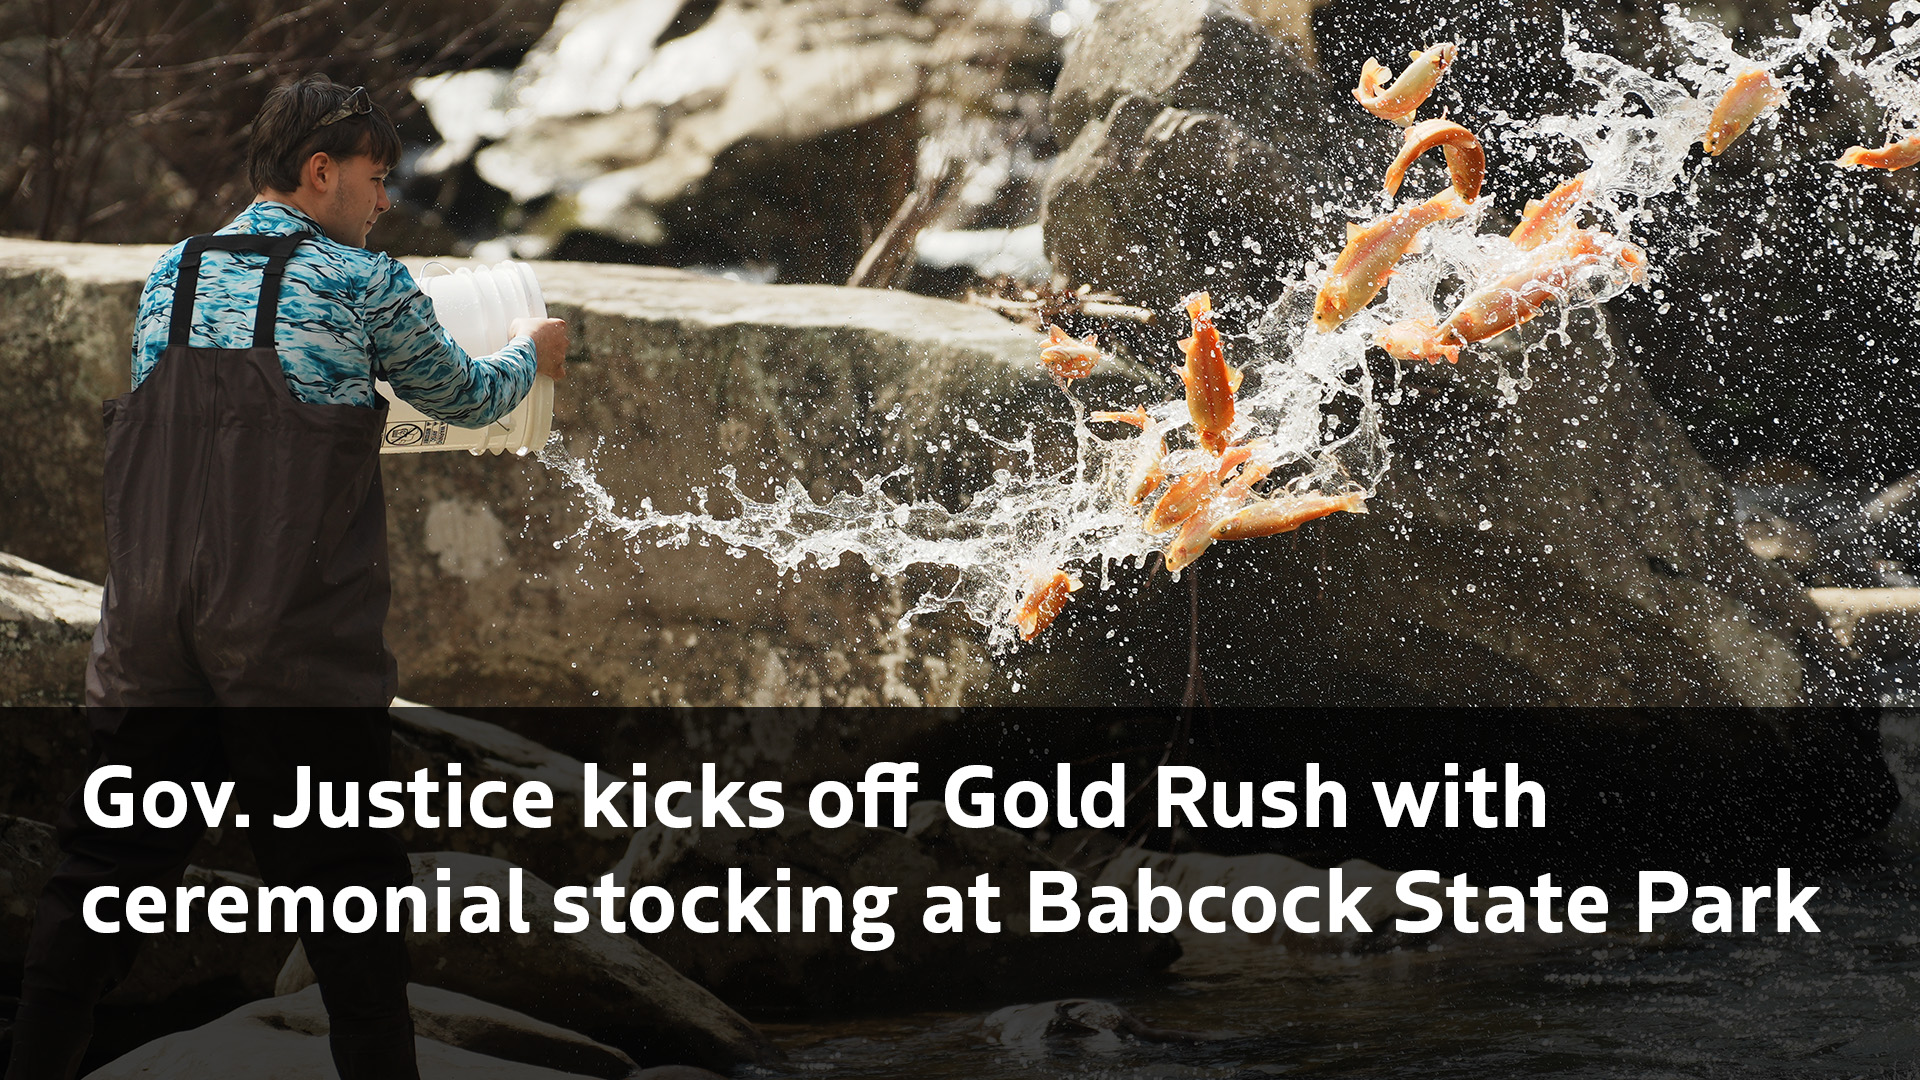 Gov. Justice kicks off Gold Rush with ceremonial stocking at Babcock